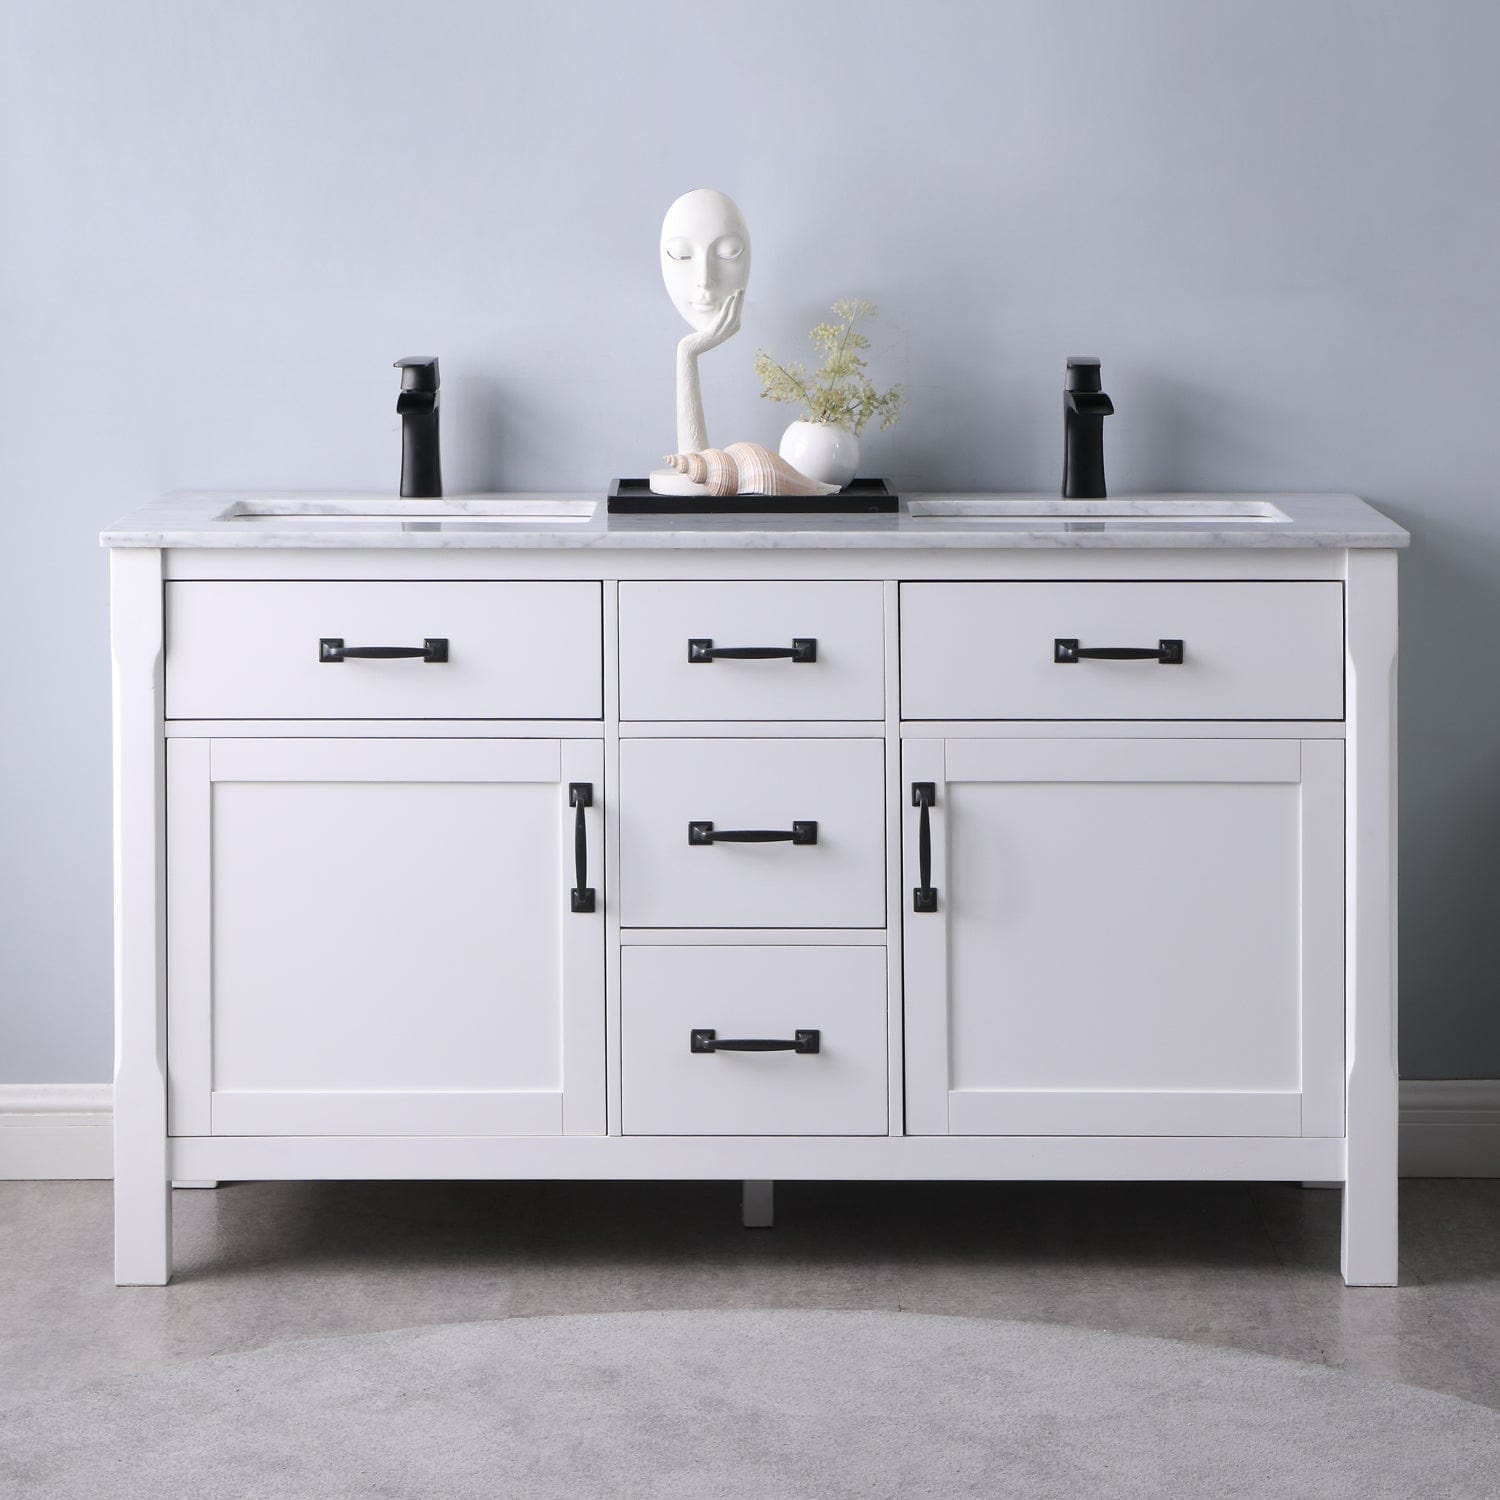 Altair Maribella 60" Double Bathroom Vanity Set in White and Carrara White Marble Countertop without Mirror 535060-WH-CA-NM - Molaix631112970389Vanity535060-WH-CA-NM